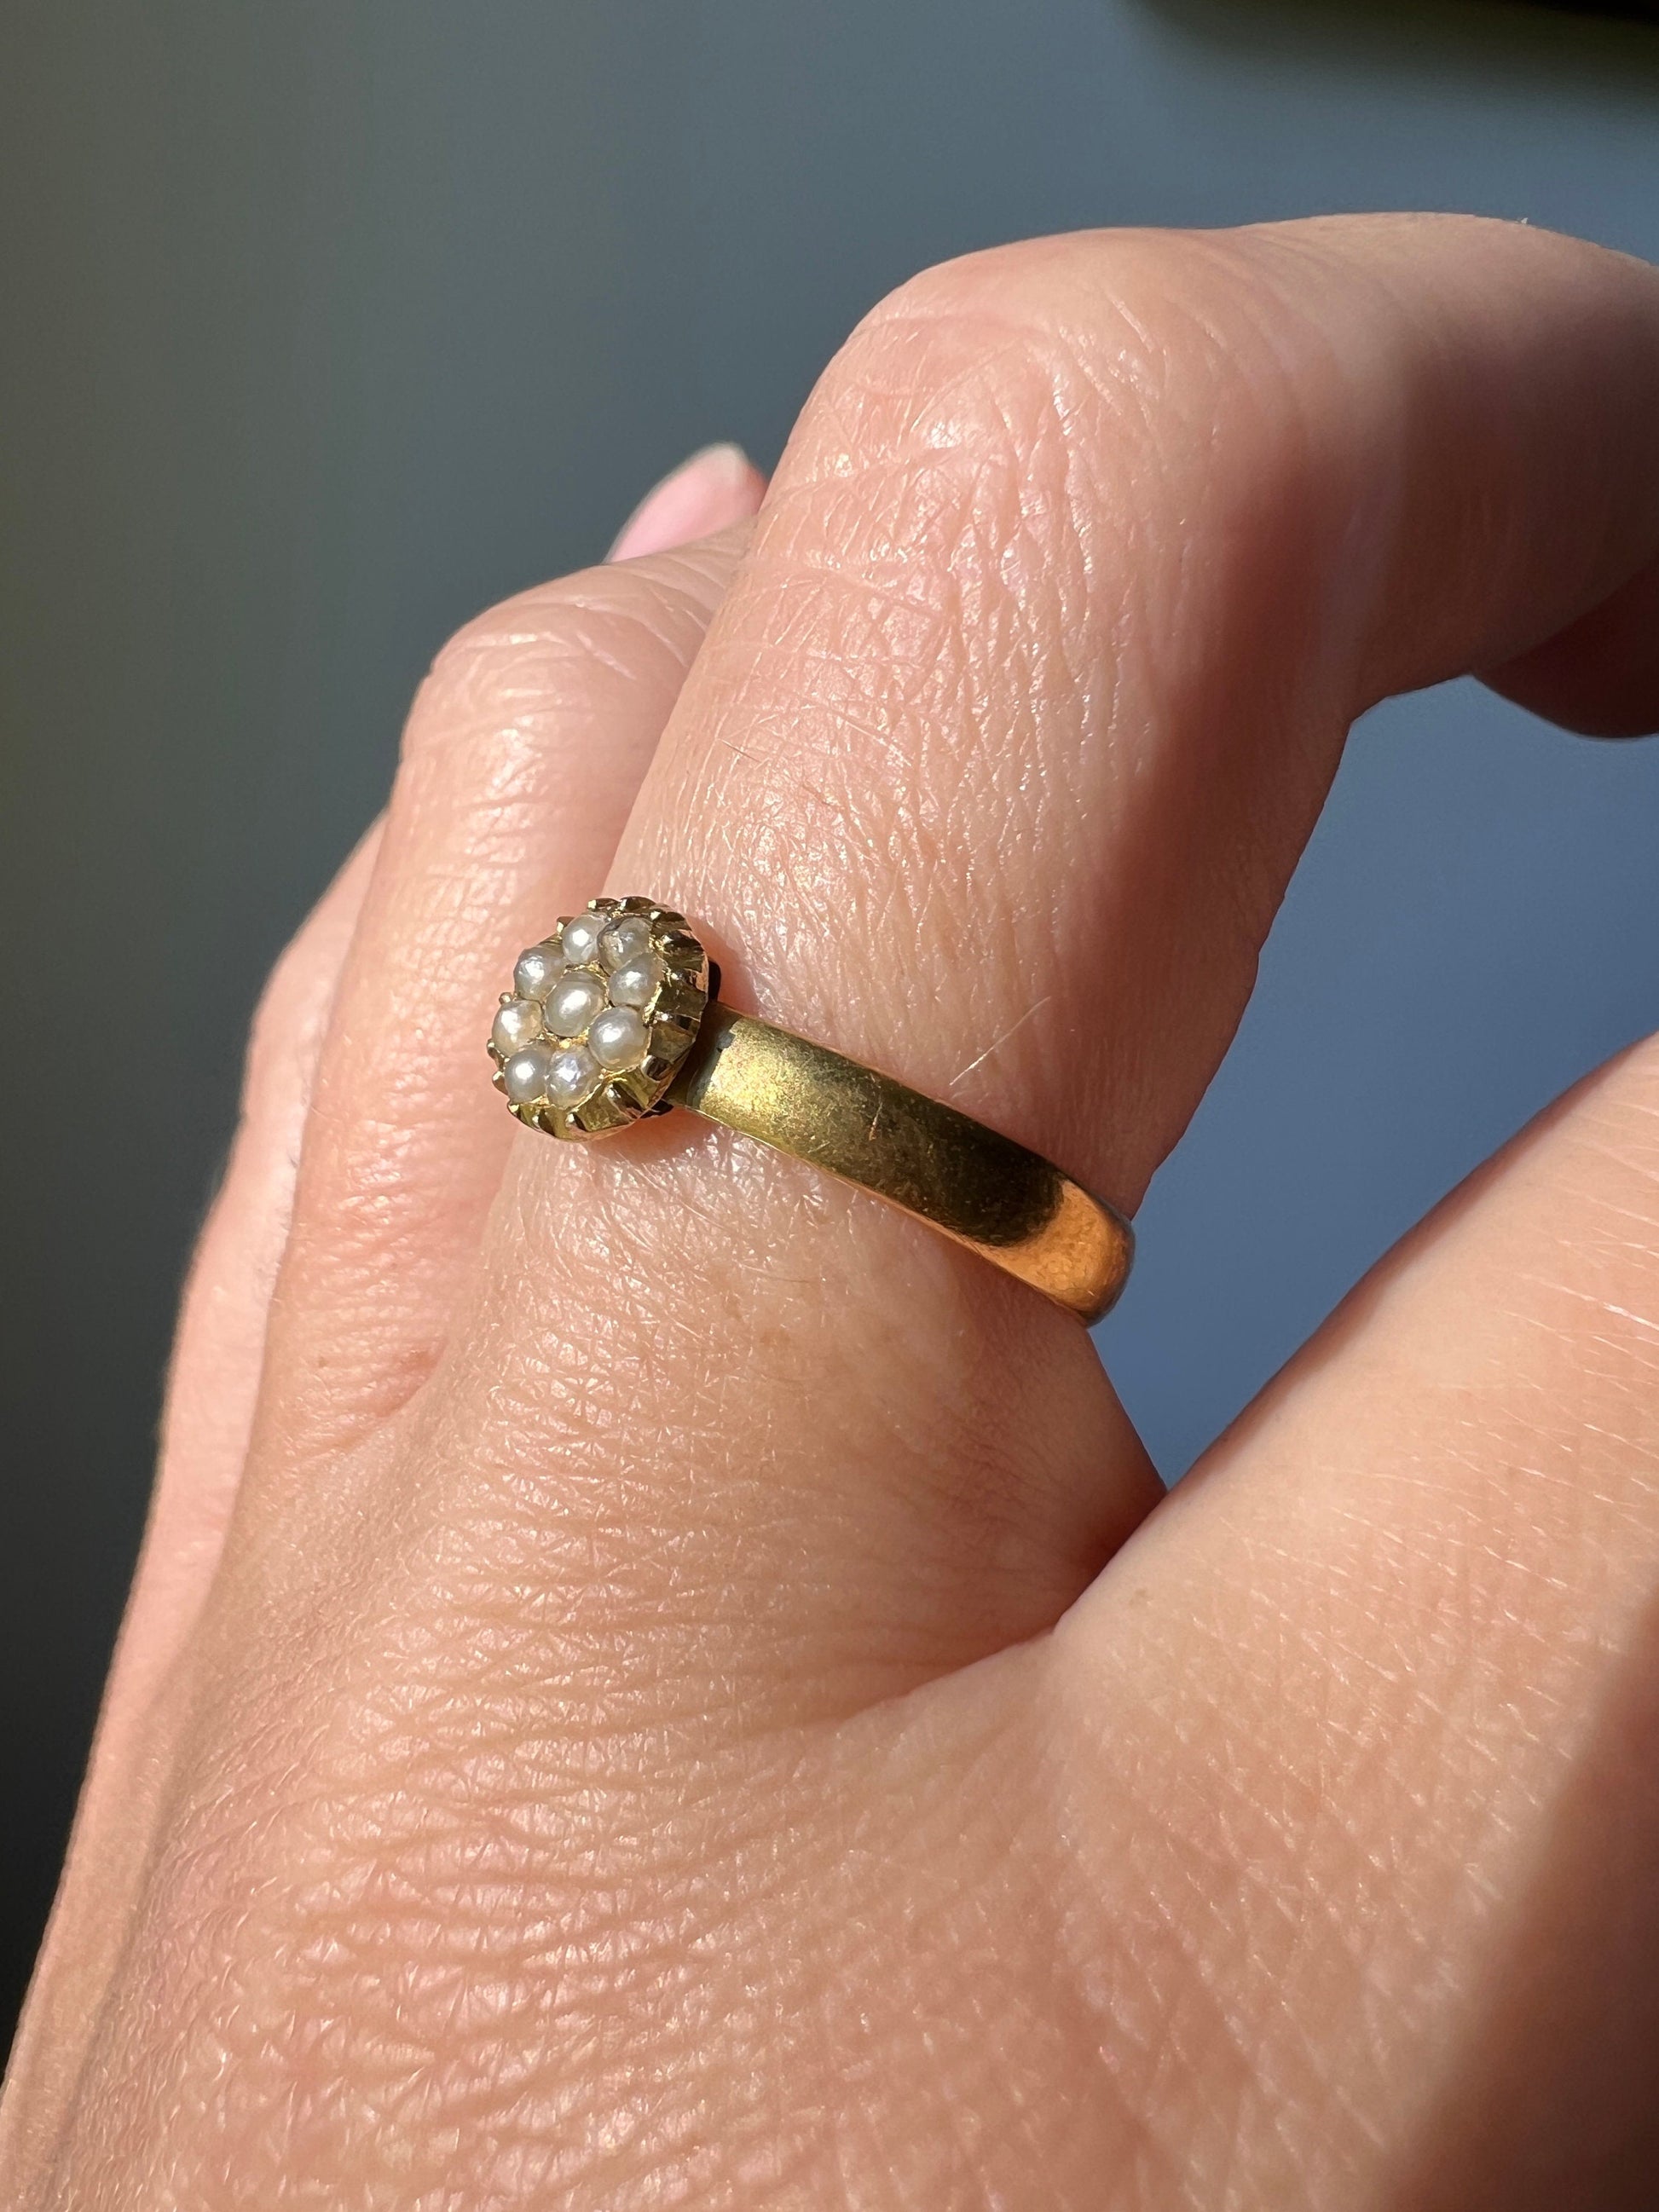 Sweetest 22k GOLD Daisy Floral PEARL Slide Victorian Antique Band Stacker Ring Floral Romantic Gift Celestial c1976 Gold Collet Cluster